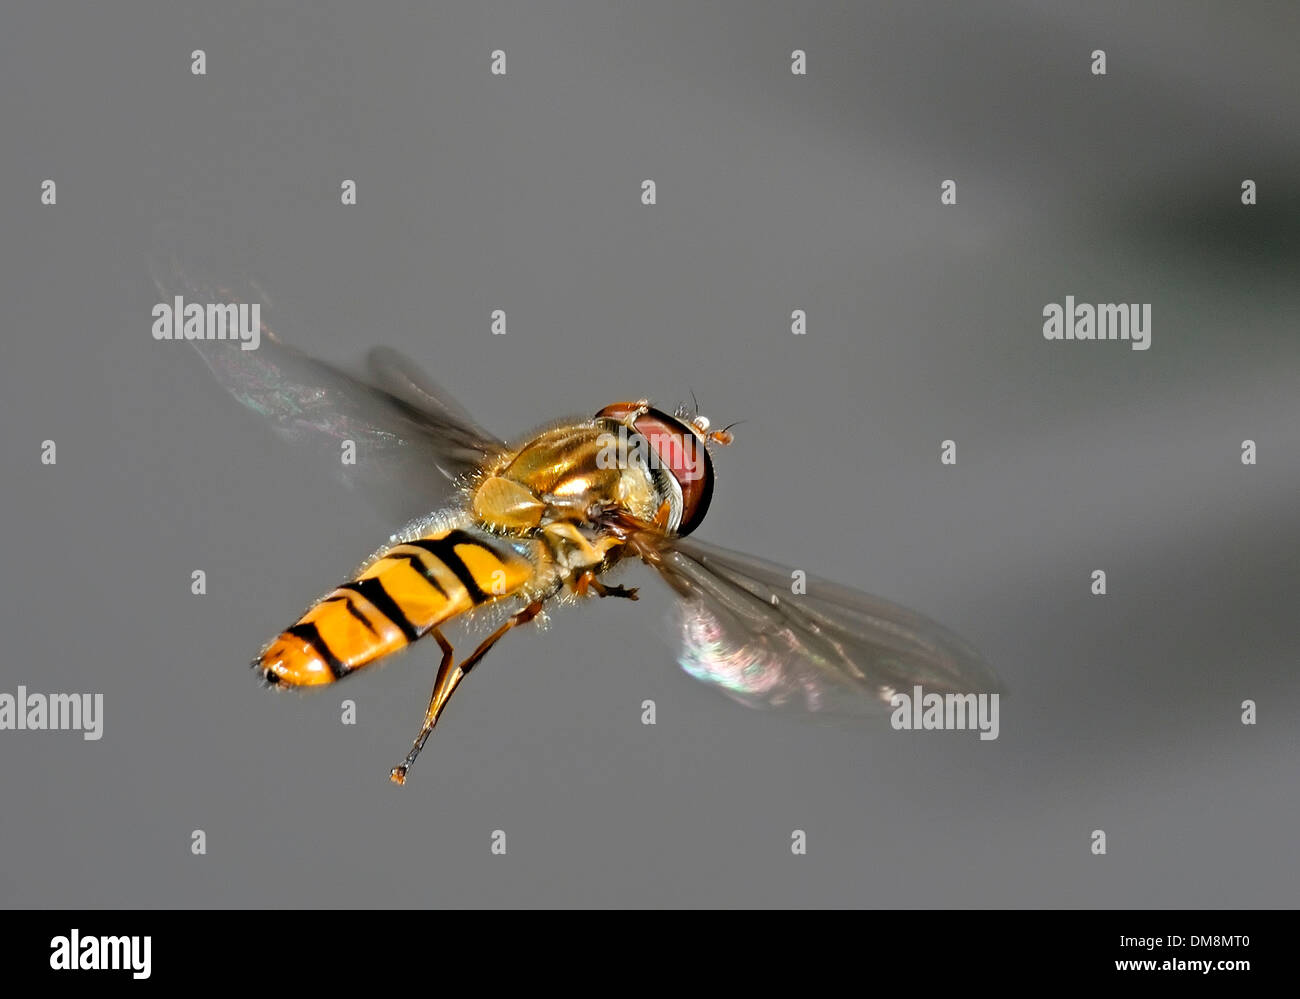 Hover fly in mid air Stock Photo